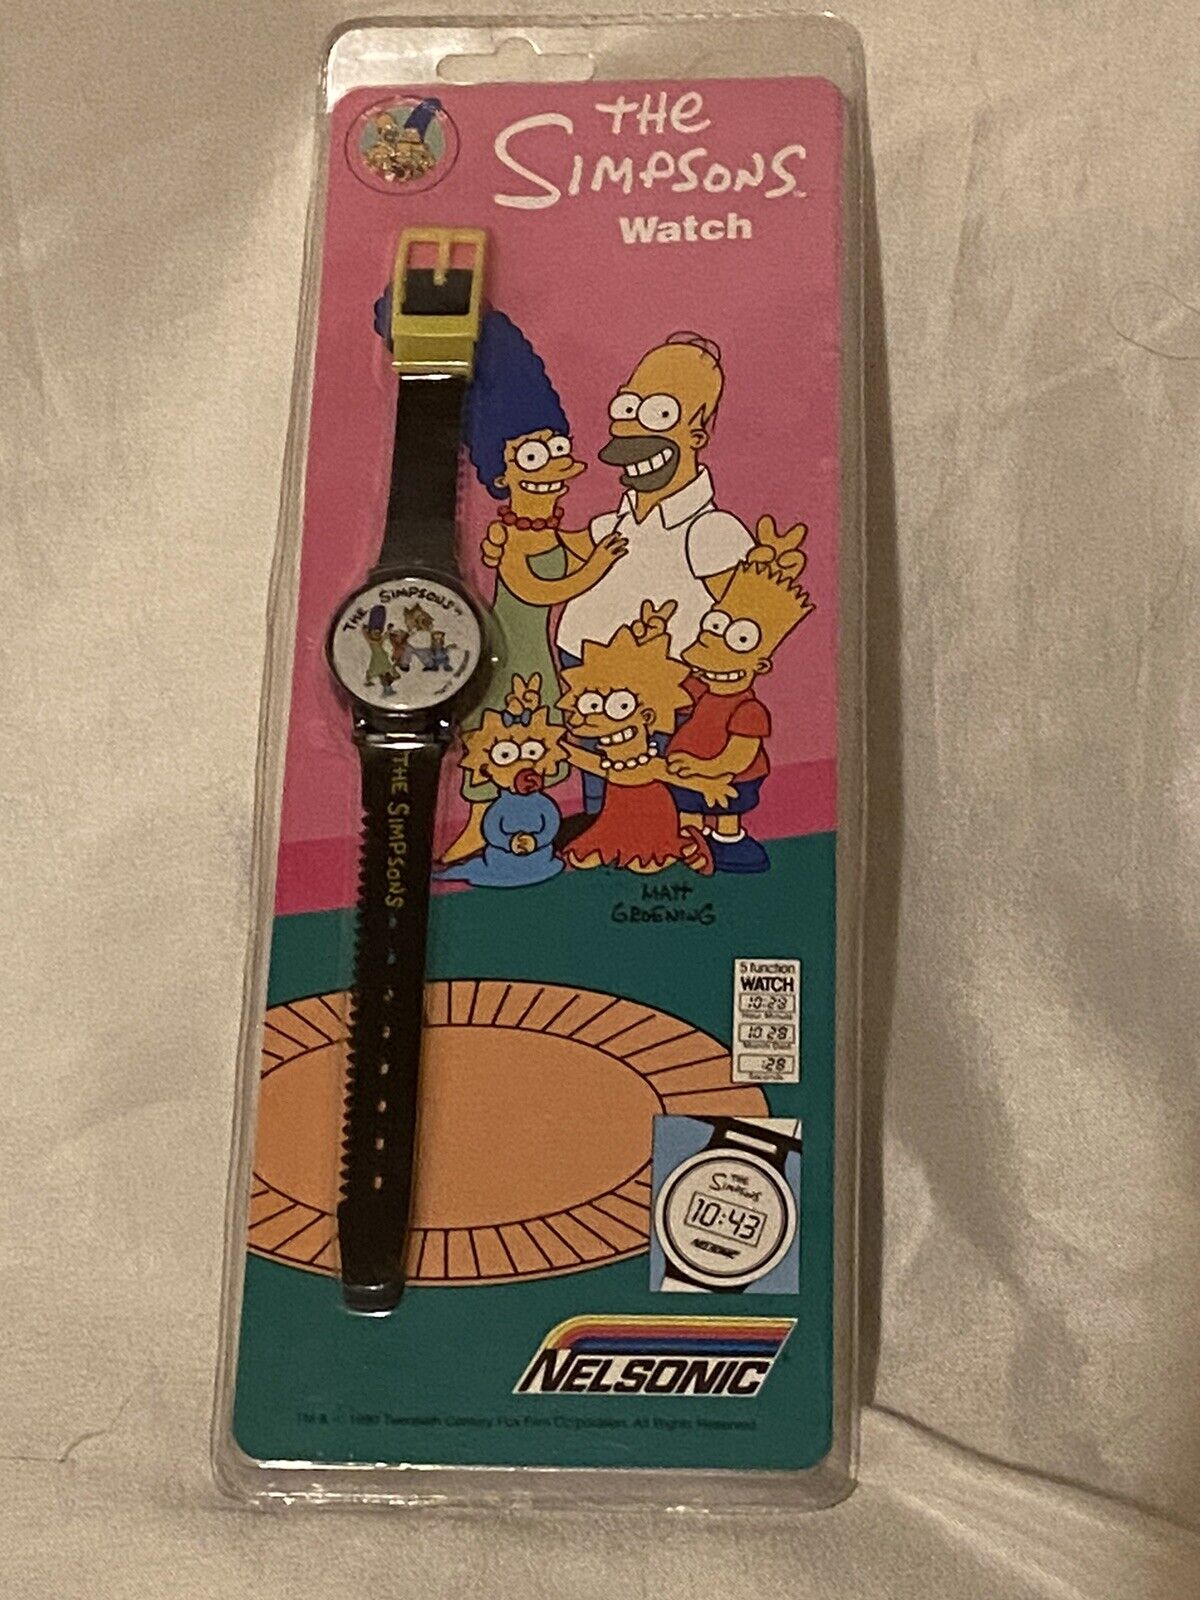 Vintage 1990 Simpson Family Nelsonic Vintage Simpsons New Sealed Wrist Watch